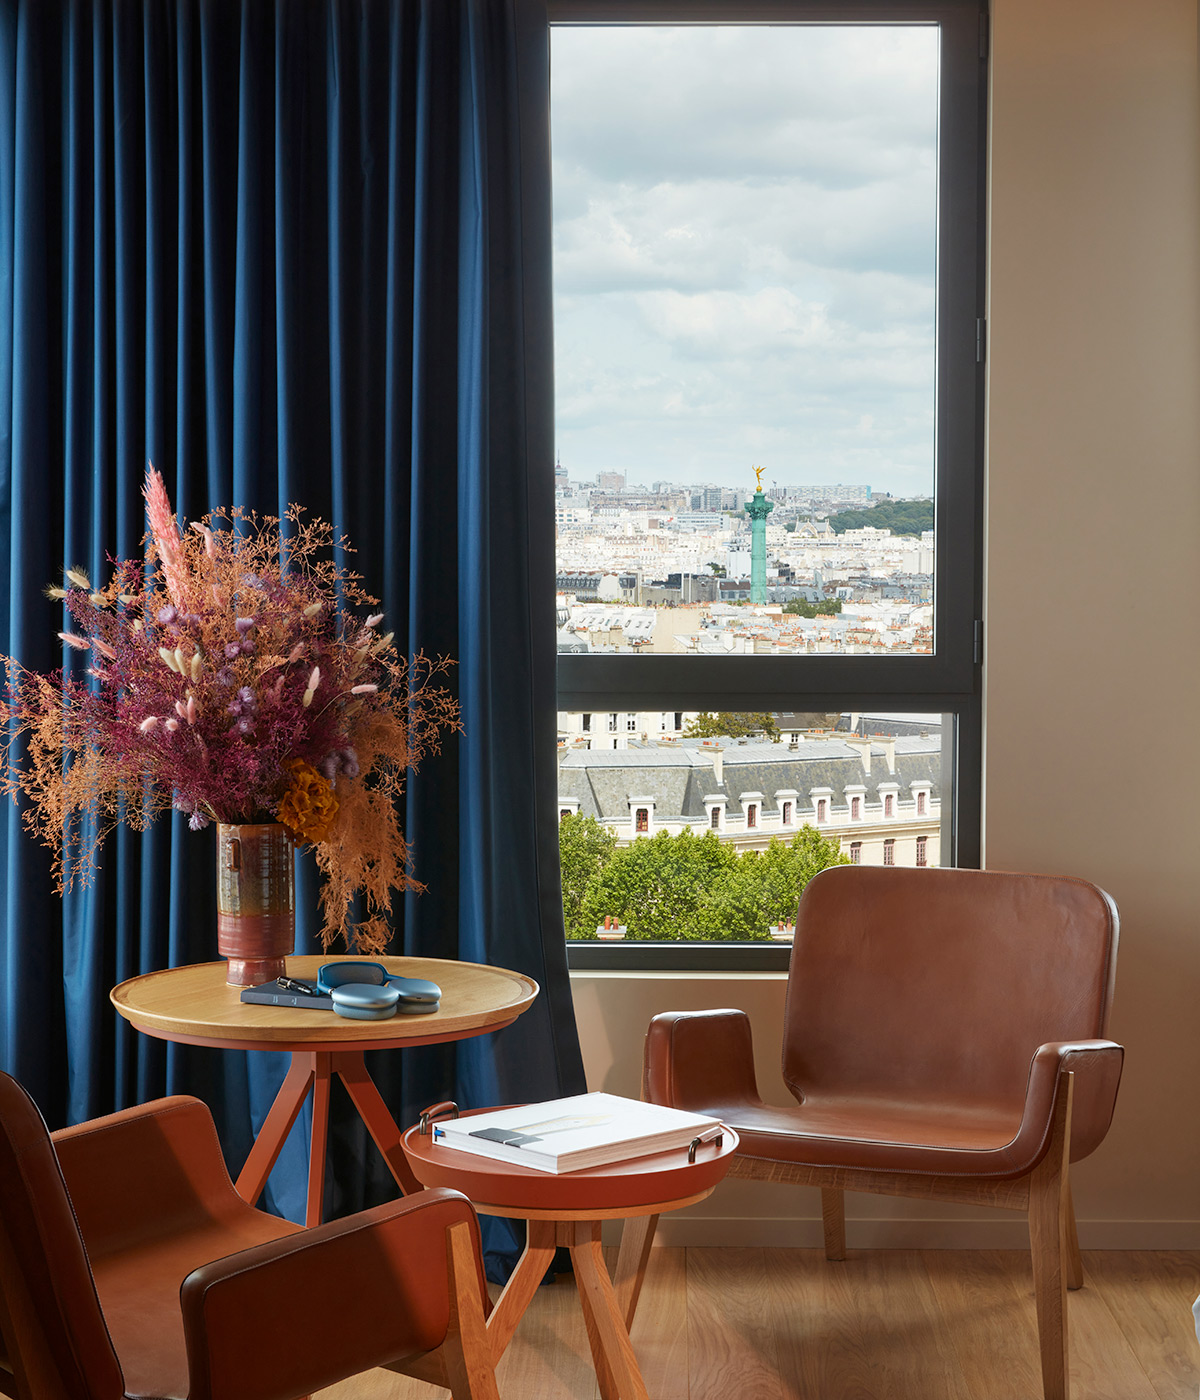 Chairs and a table await a guest with flowers on the table and a sunny view of paris through the large window.